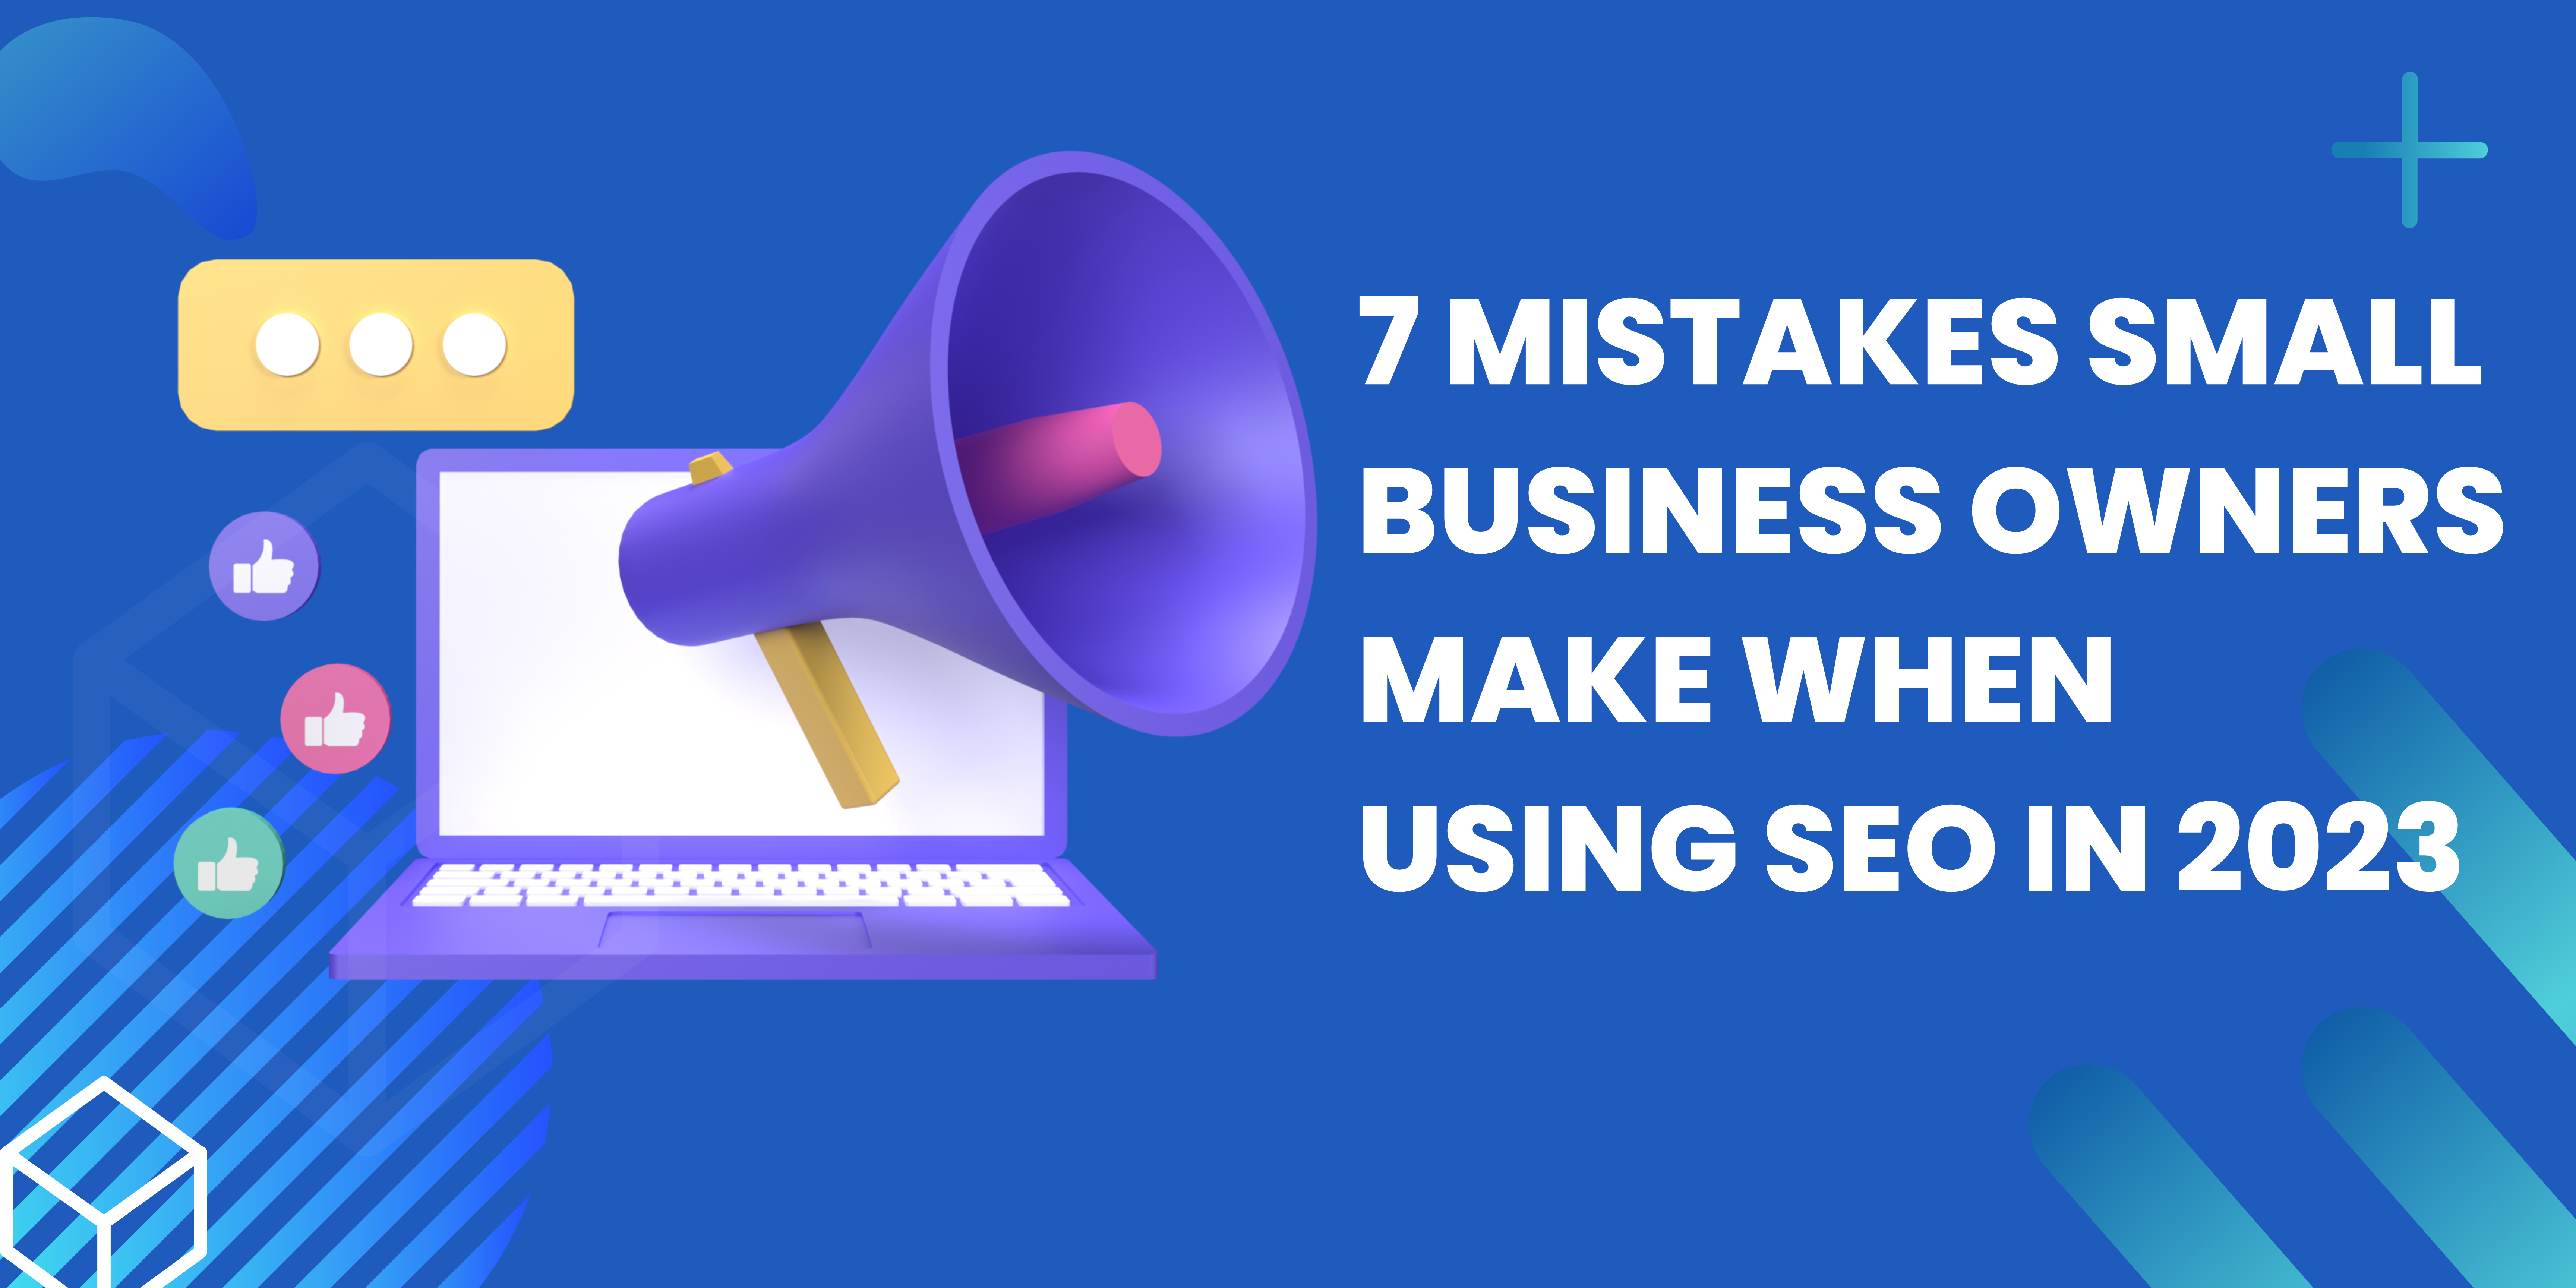 7-Mistakes-Small-Business-Owners-Make-When-Using-SEO-in-2023-By-Renaissance-Marekting